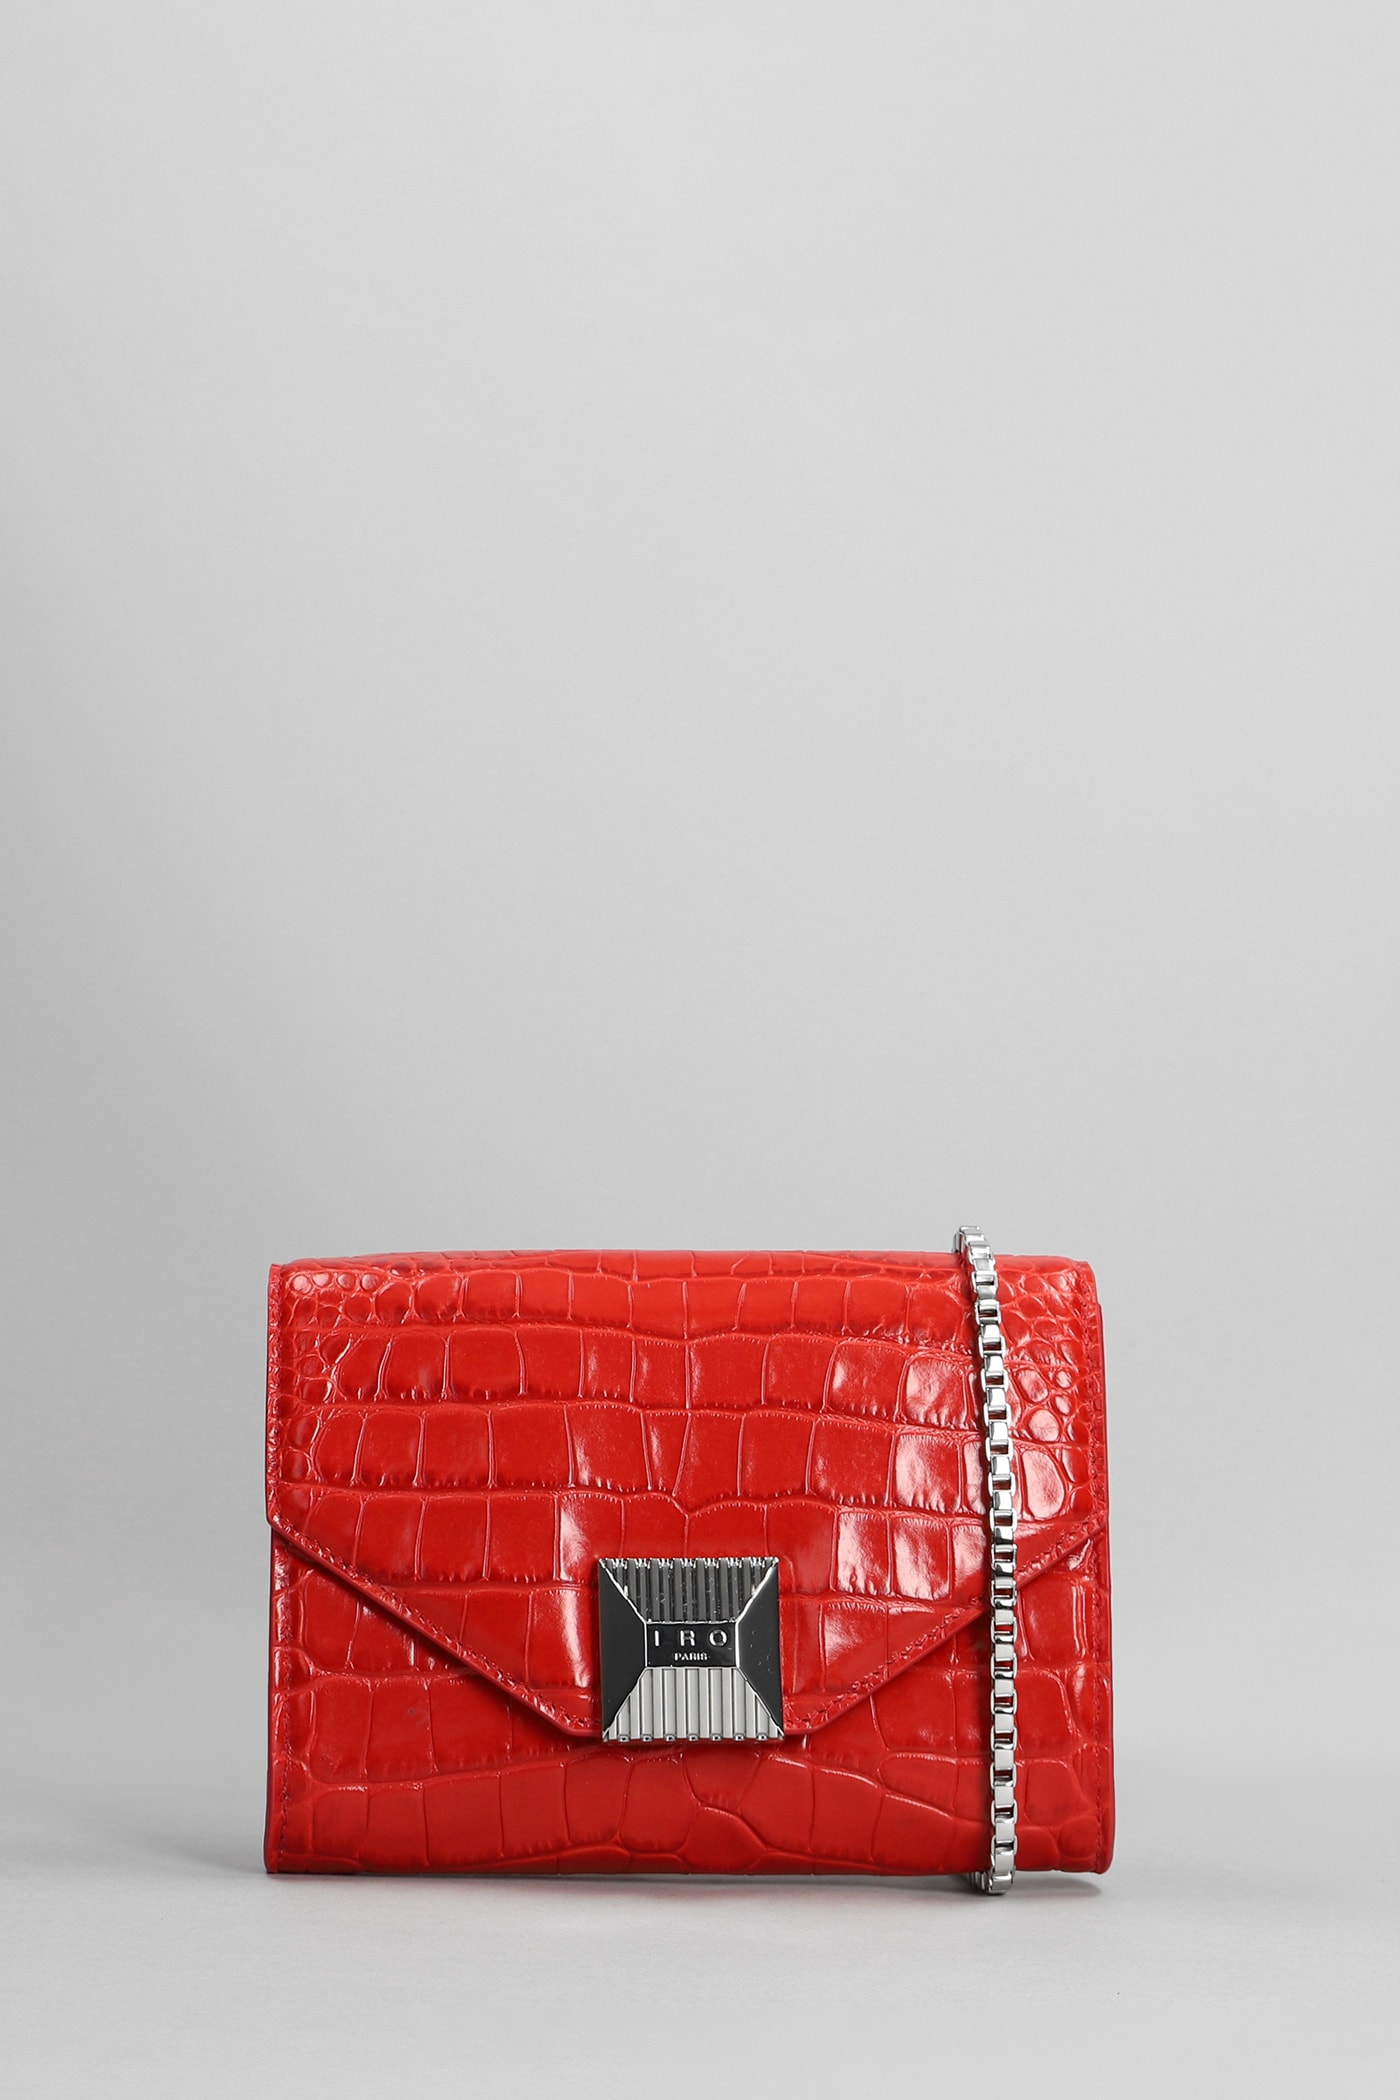 IRO Horuphone Shoulder Bag In Red Leather